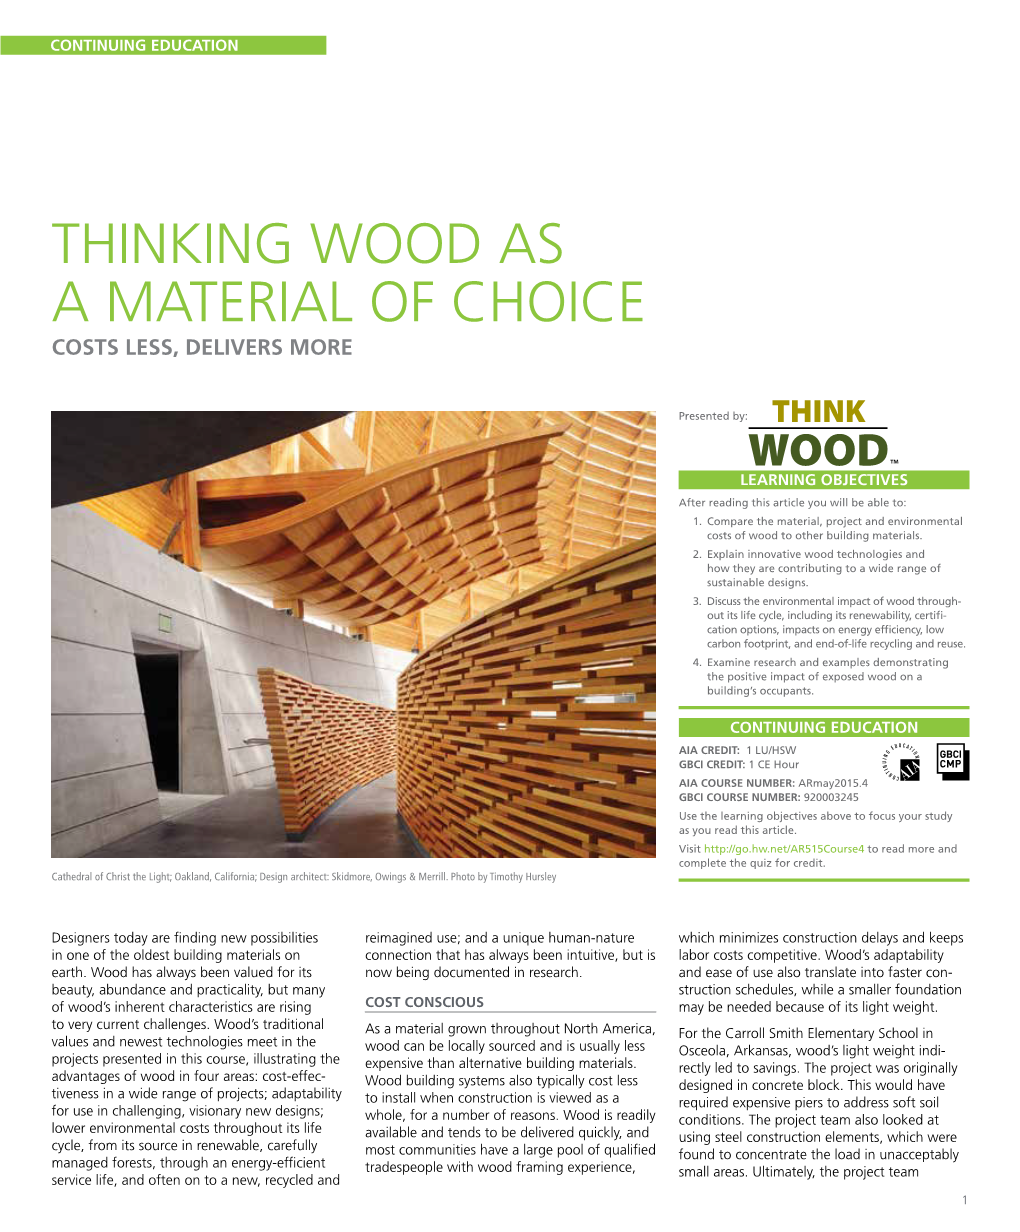 Thinking Wood As a Material of Choice Costs Less, Delivers More